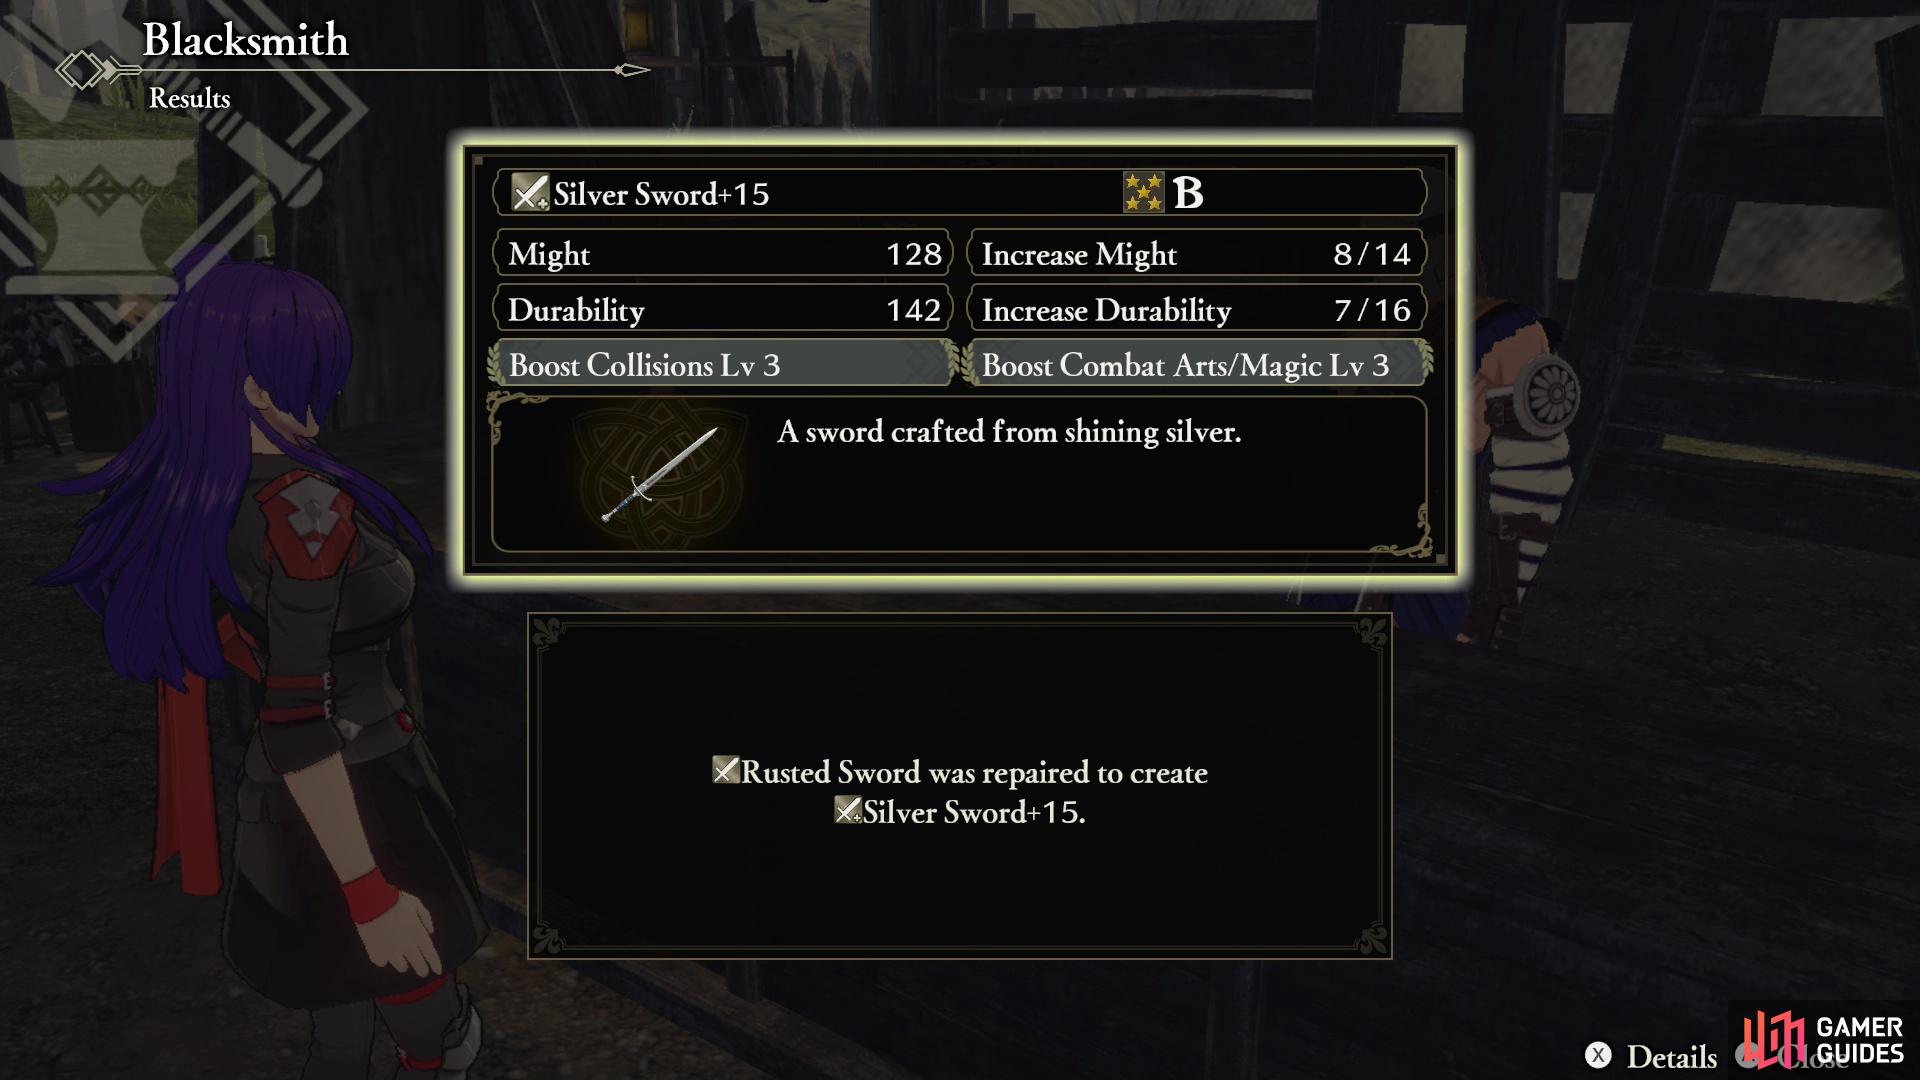 Many of the best weapons in the game are broken when you find them, and you must upgrade your Blacksmith in order to Repair them, making them useable.